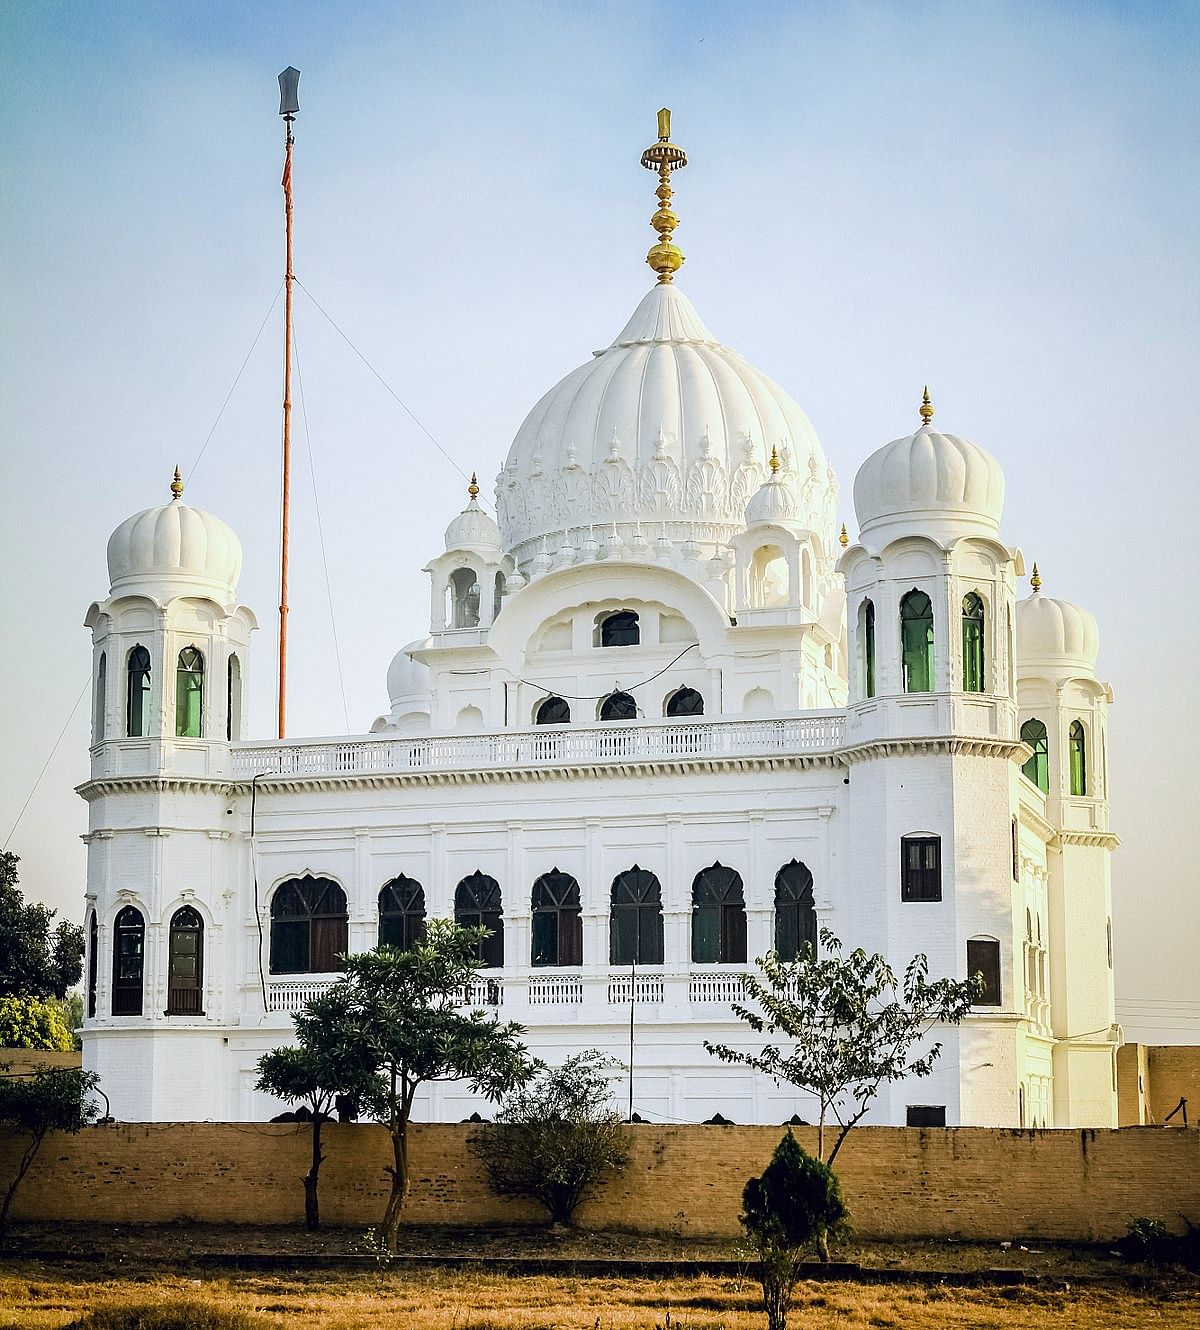 The  gurdwara, significant as the final resting place of Guru Nanak, is  politically significant for Indo-Pak ties.